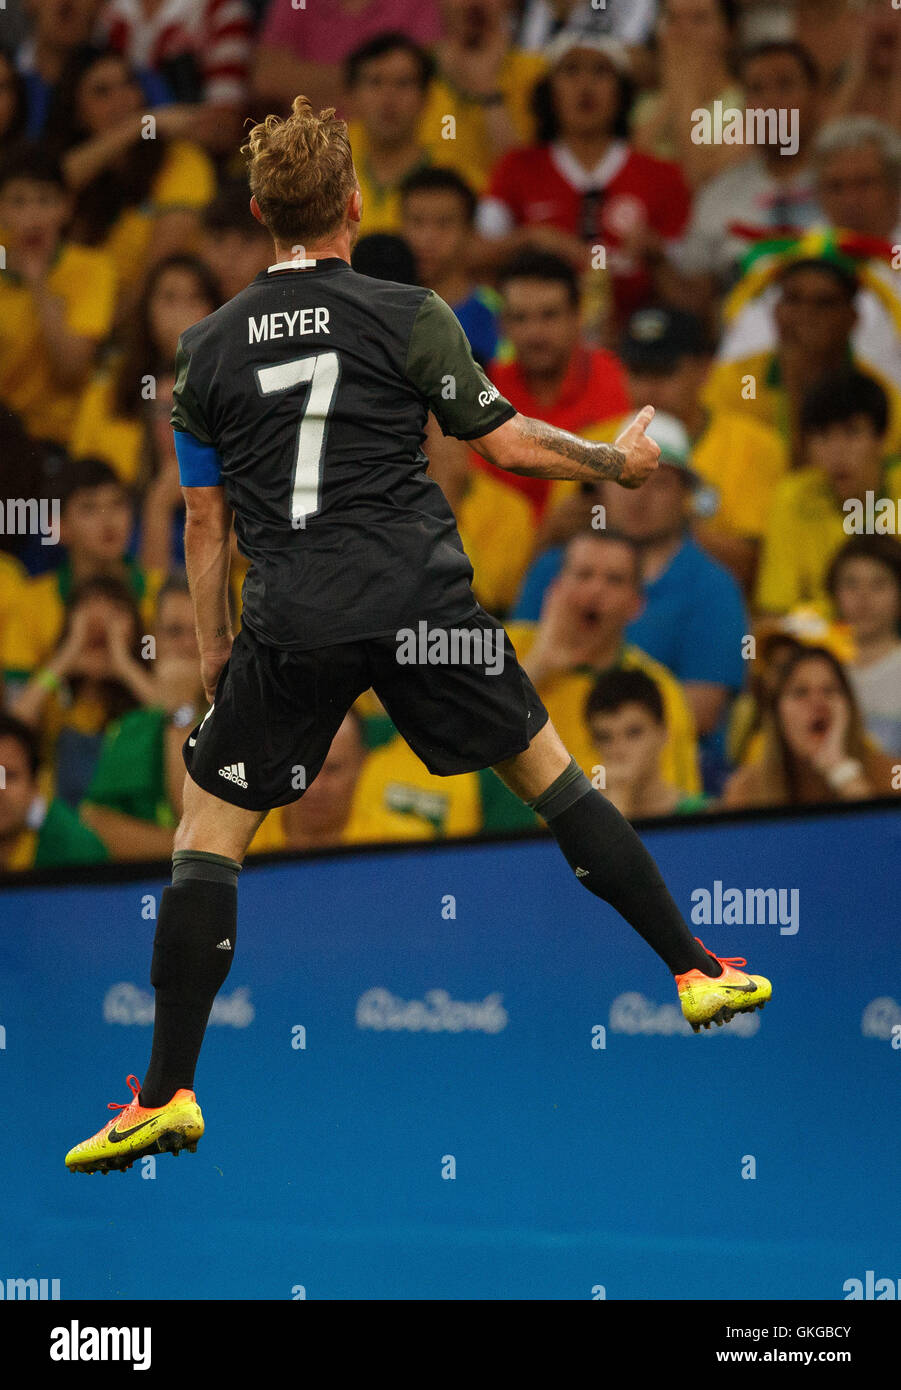 Rio De Janeiro, Brazil. 20th Aug, 2016. MEYER Maximilian of Germany celebrates after scoring during starting equalizer between Brazil vs Germany valid for the race for football gold in Rio Olympics 2016 held at Maracanã Stadium. NOT AVAILABLE FOR LICENSING IN CHINA (Photo: Marcelo Machado de Melo/Fotoarena) Credit:  Foto Arena LTDA/Alamy Live News Stock Photo